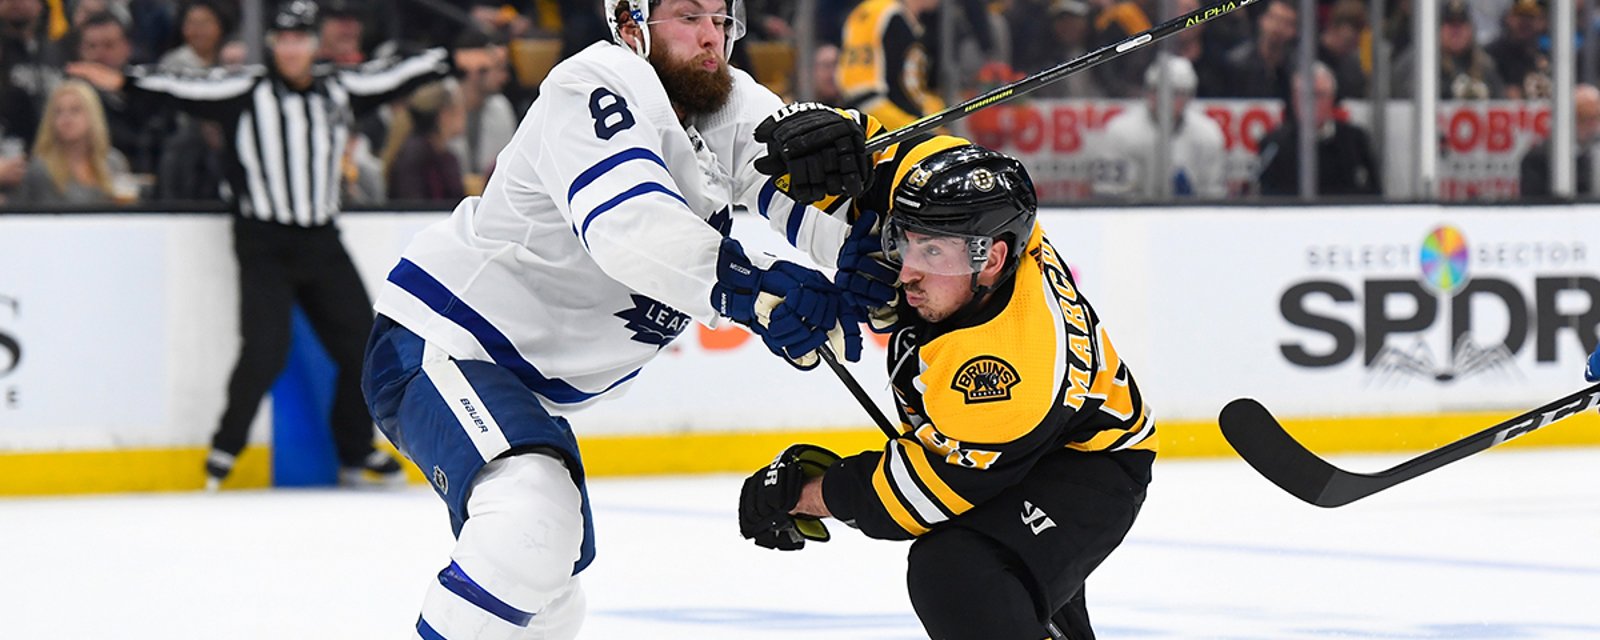 Report: Bruins complain to the league about Leafs’ tactics ahead of Game 7